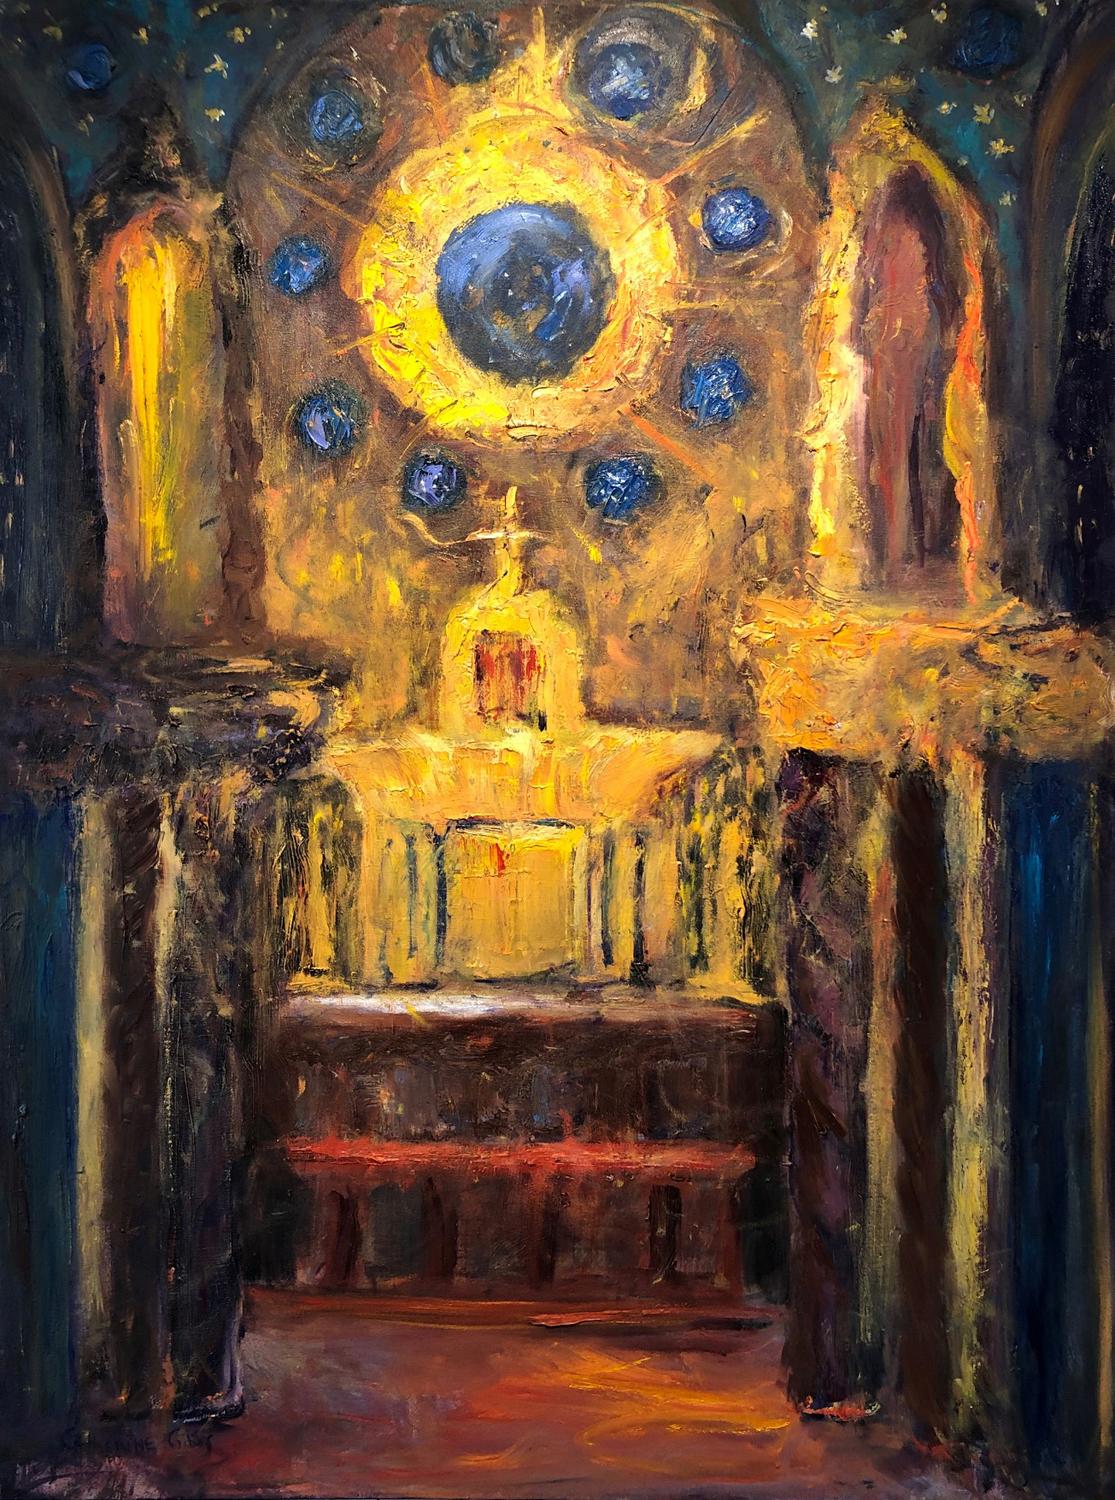 Catherine Picard-Gibbs Interior Painting - "Altar with Celestial Blue and Gold", expressionist, textural, oil painting